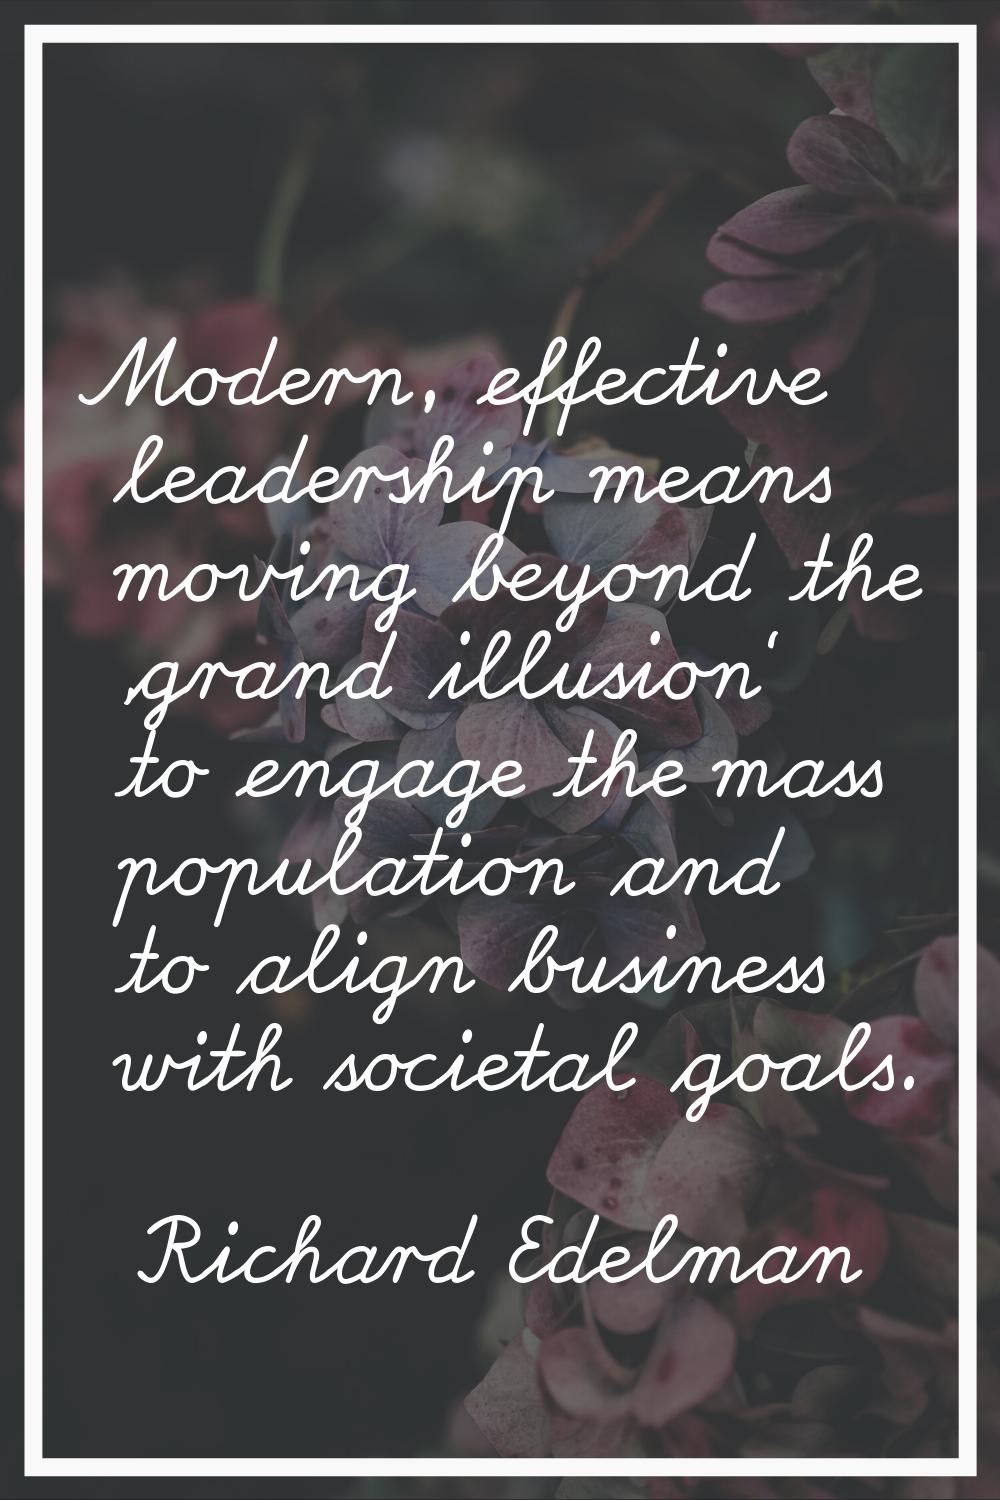 Modern, effective leadership means moving beyond the 'grand illusion' to engage the mass population